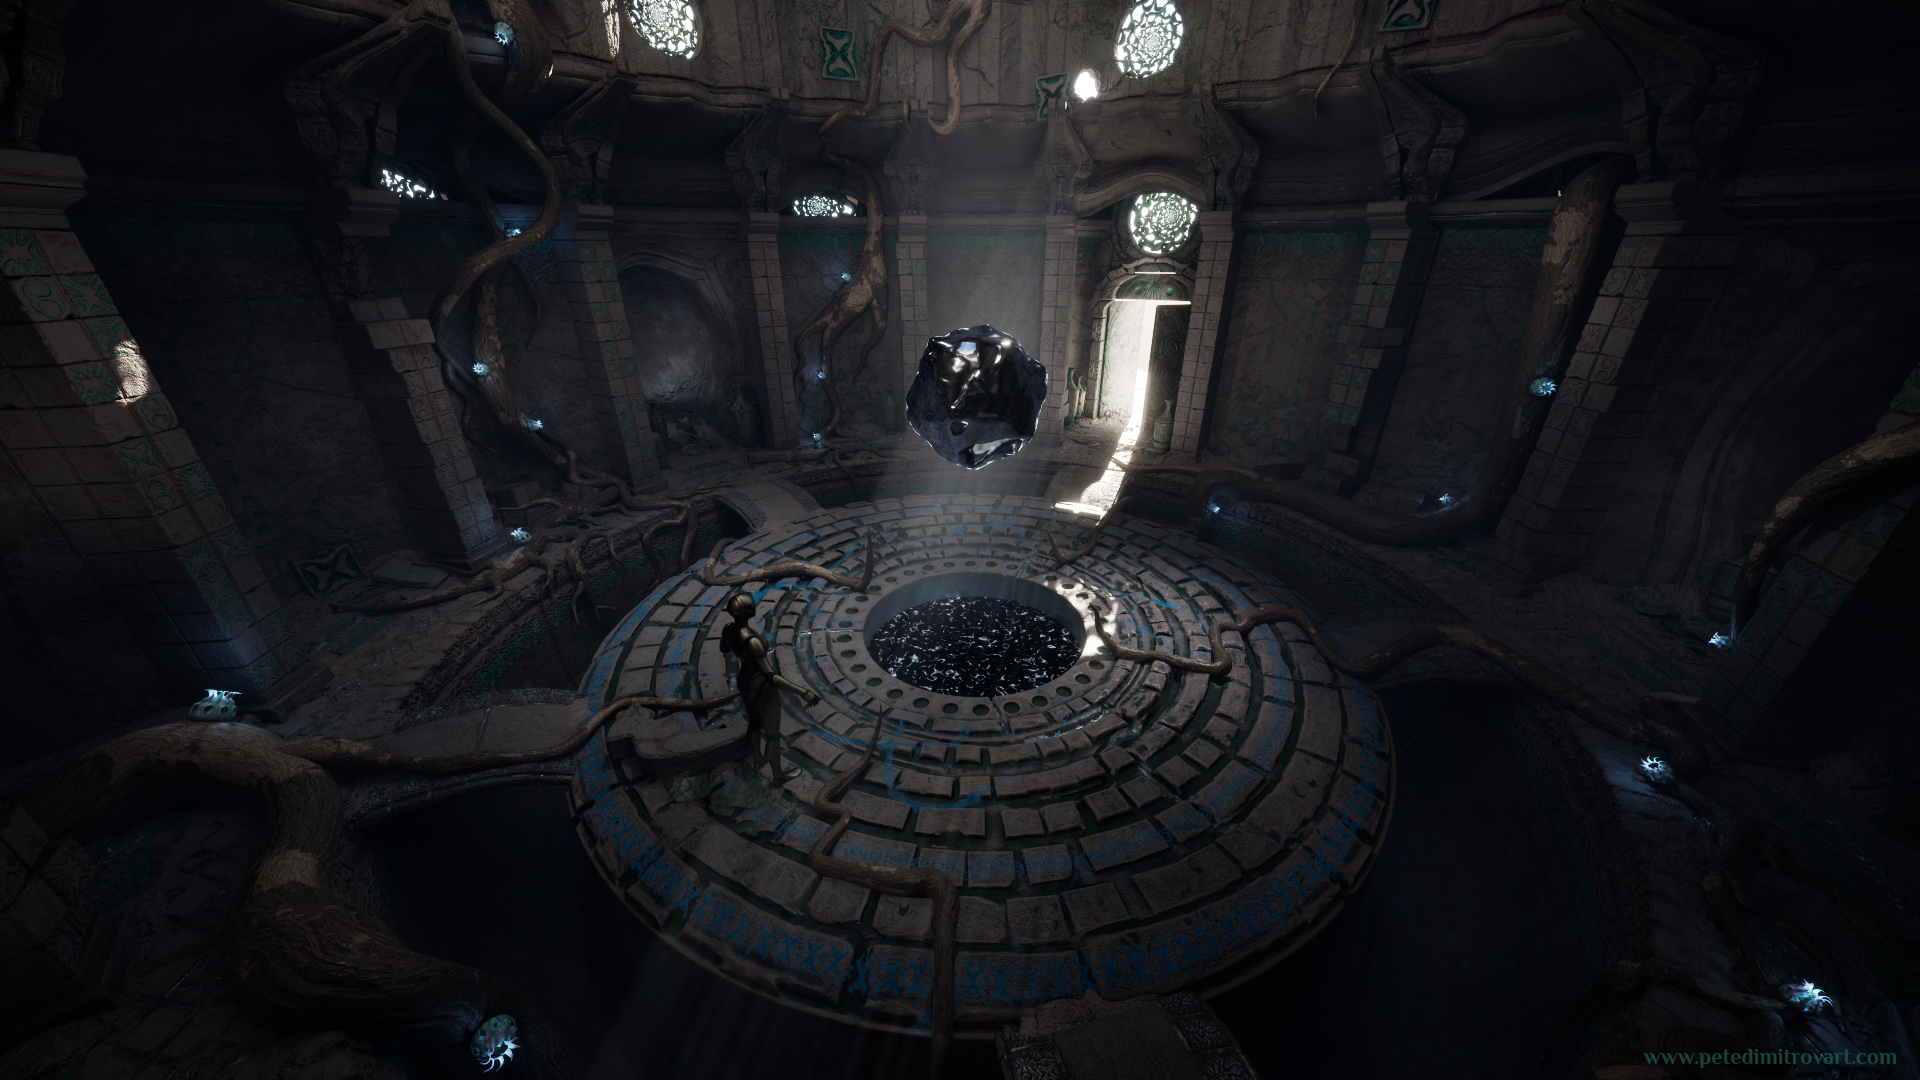 Upper camera angle showing the Unreal Engine 5 scene. The metal orb floats in the middle while the color through decals and inscriptions its surrounded by is blue.